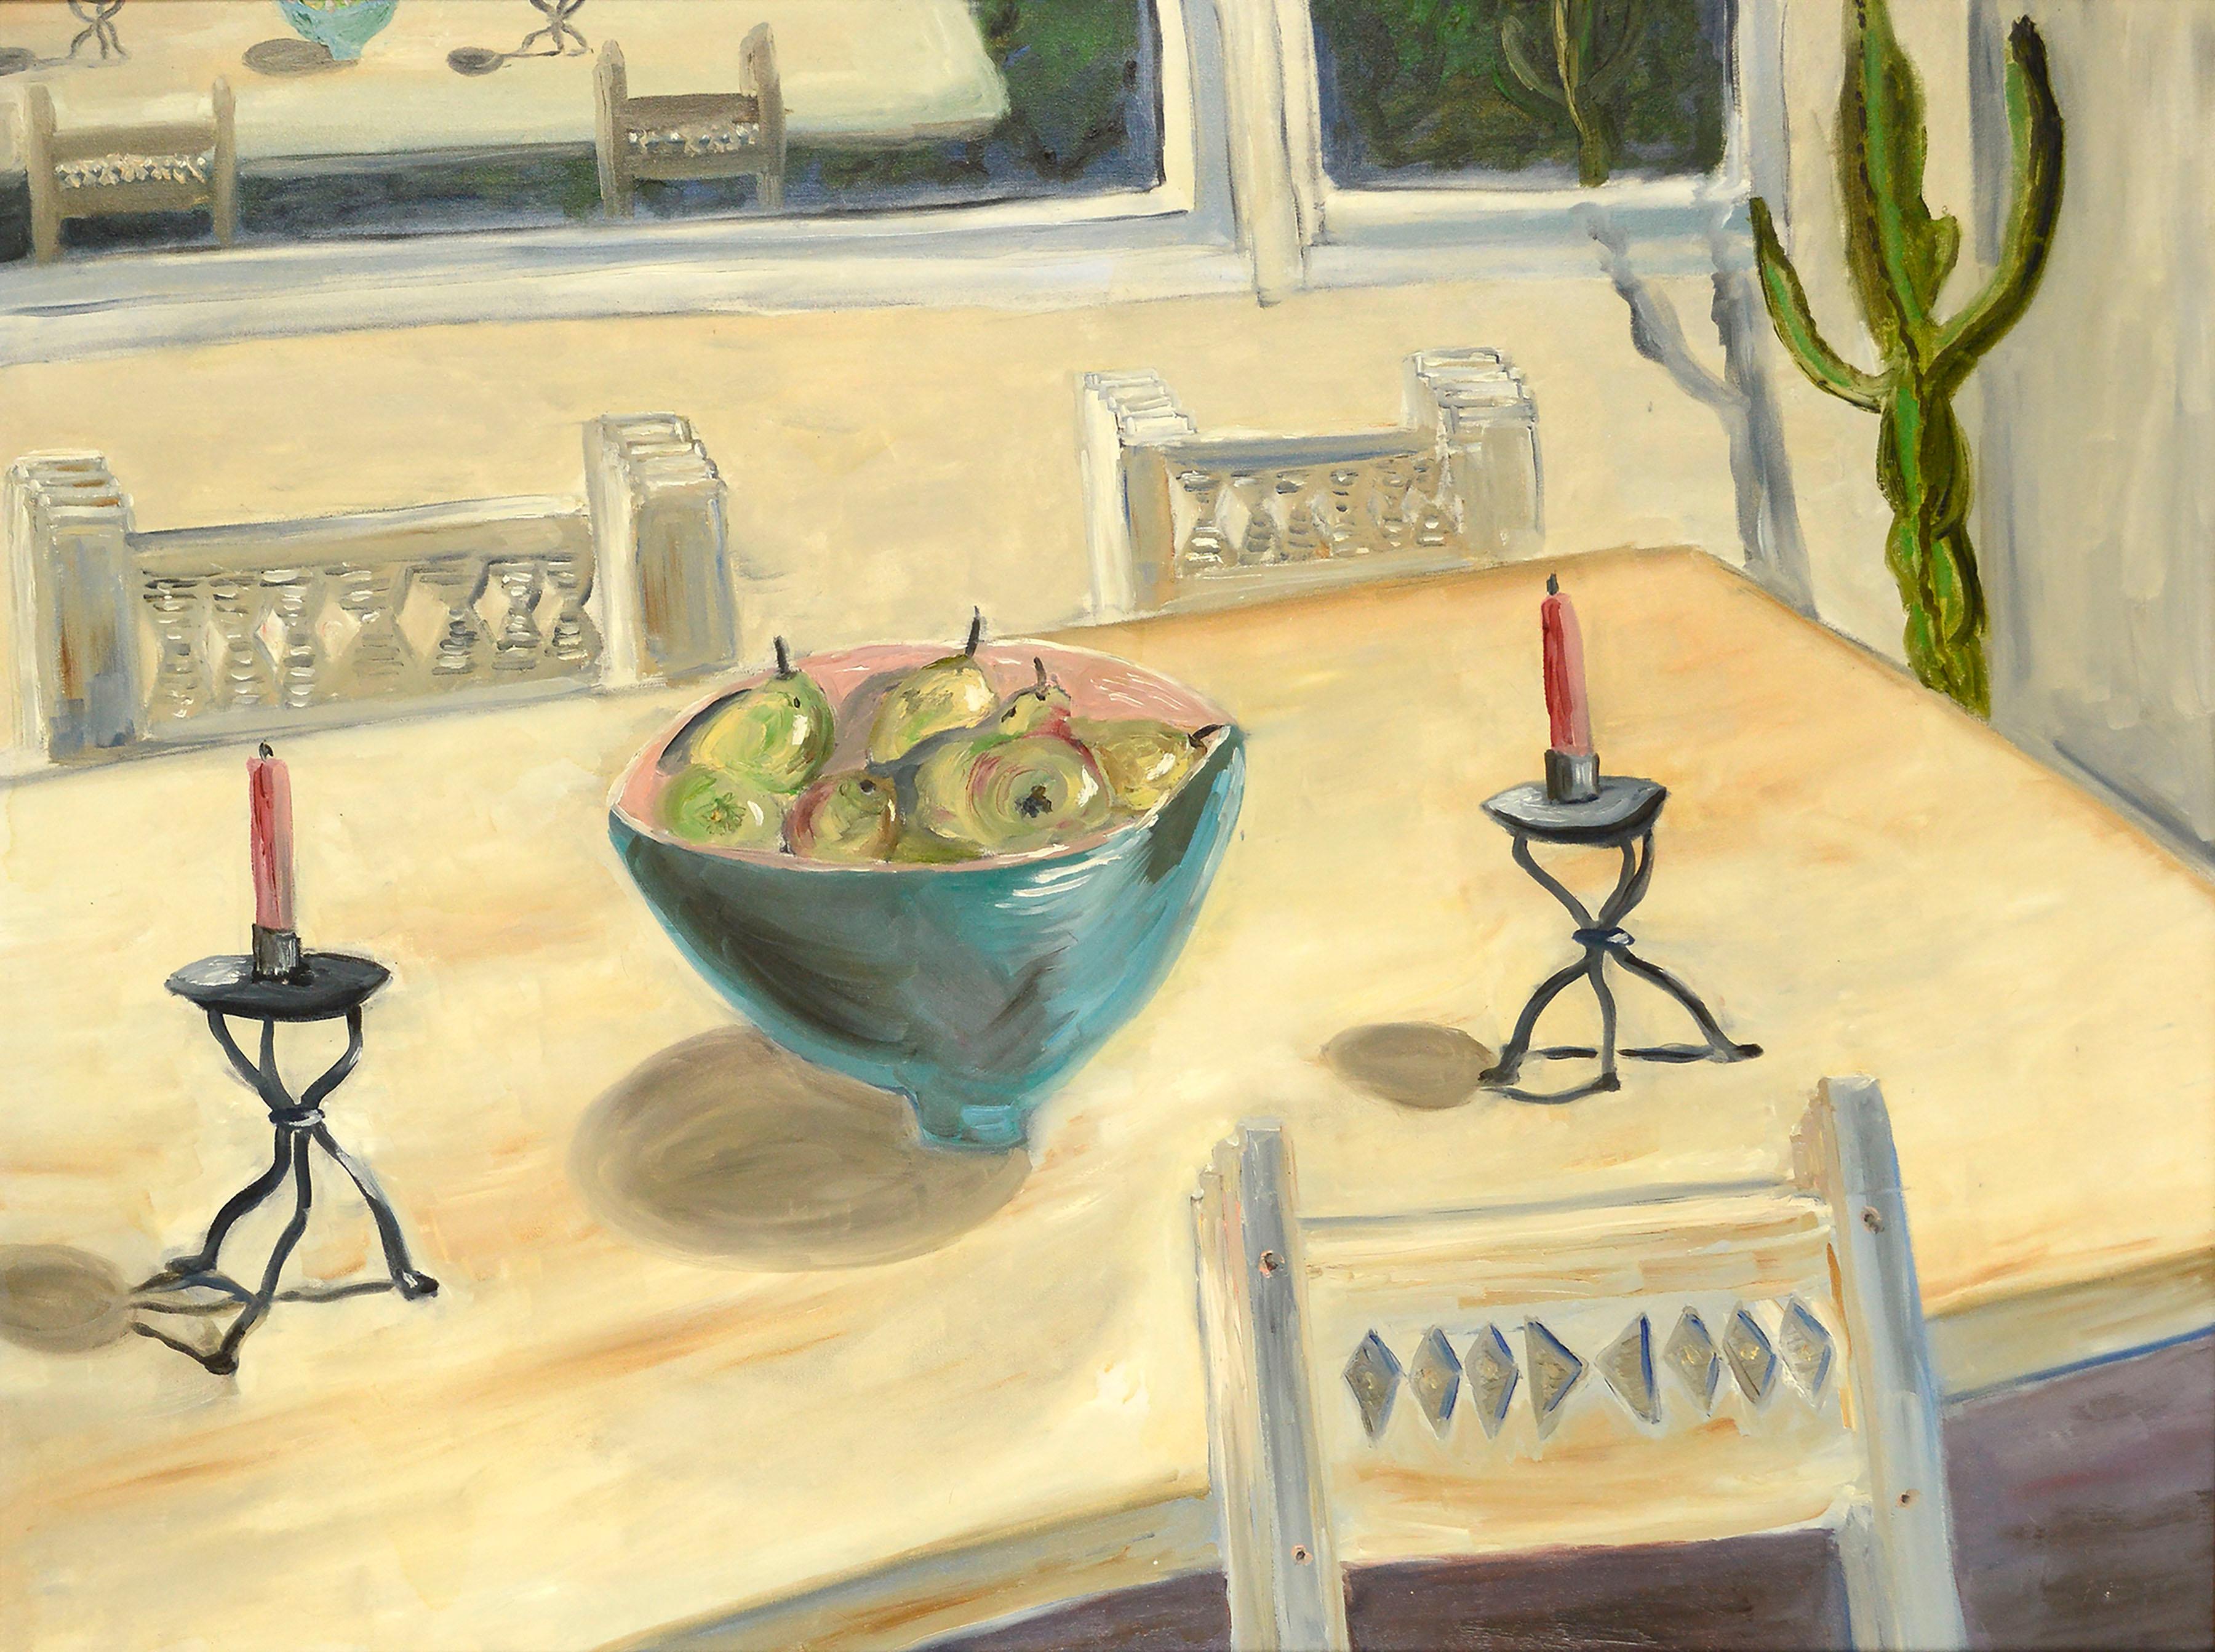 Large-Scale Interior Dining Room Table Still-Life with Pears, Candles, & Cactus  - Painting by Unknown